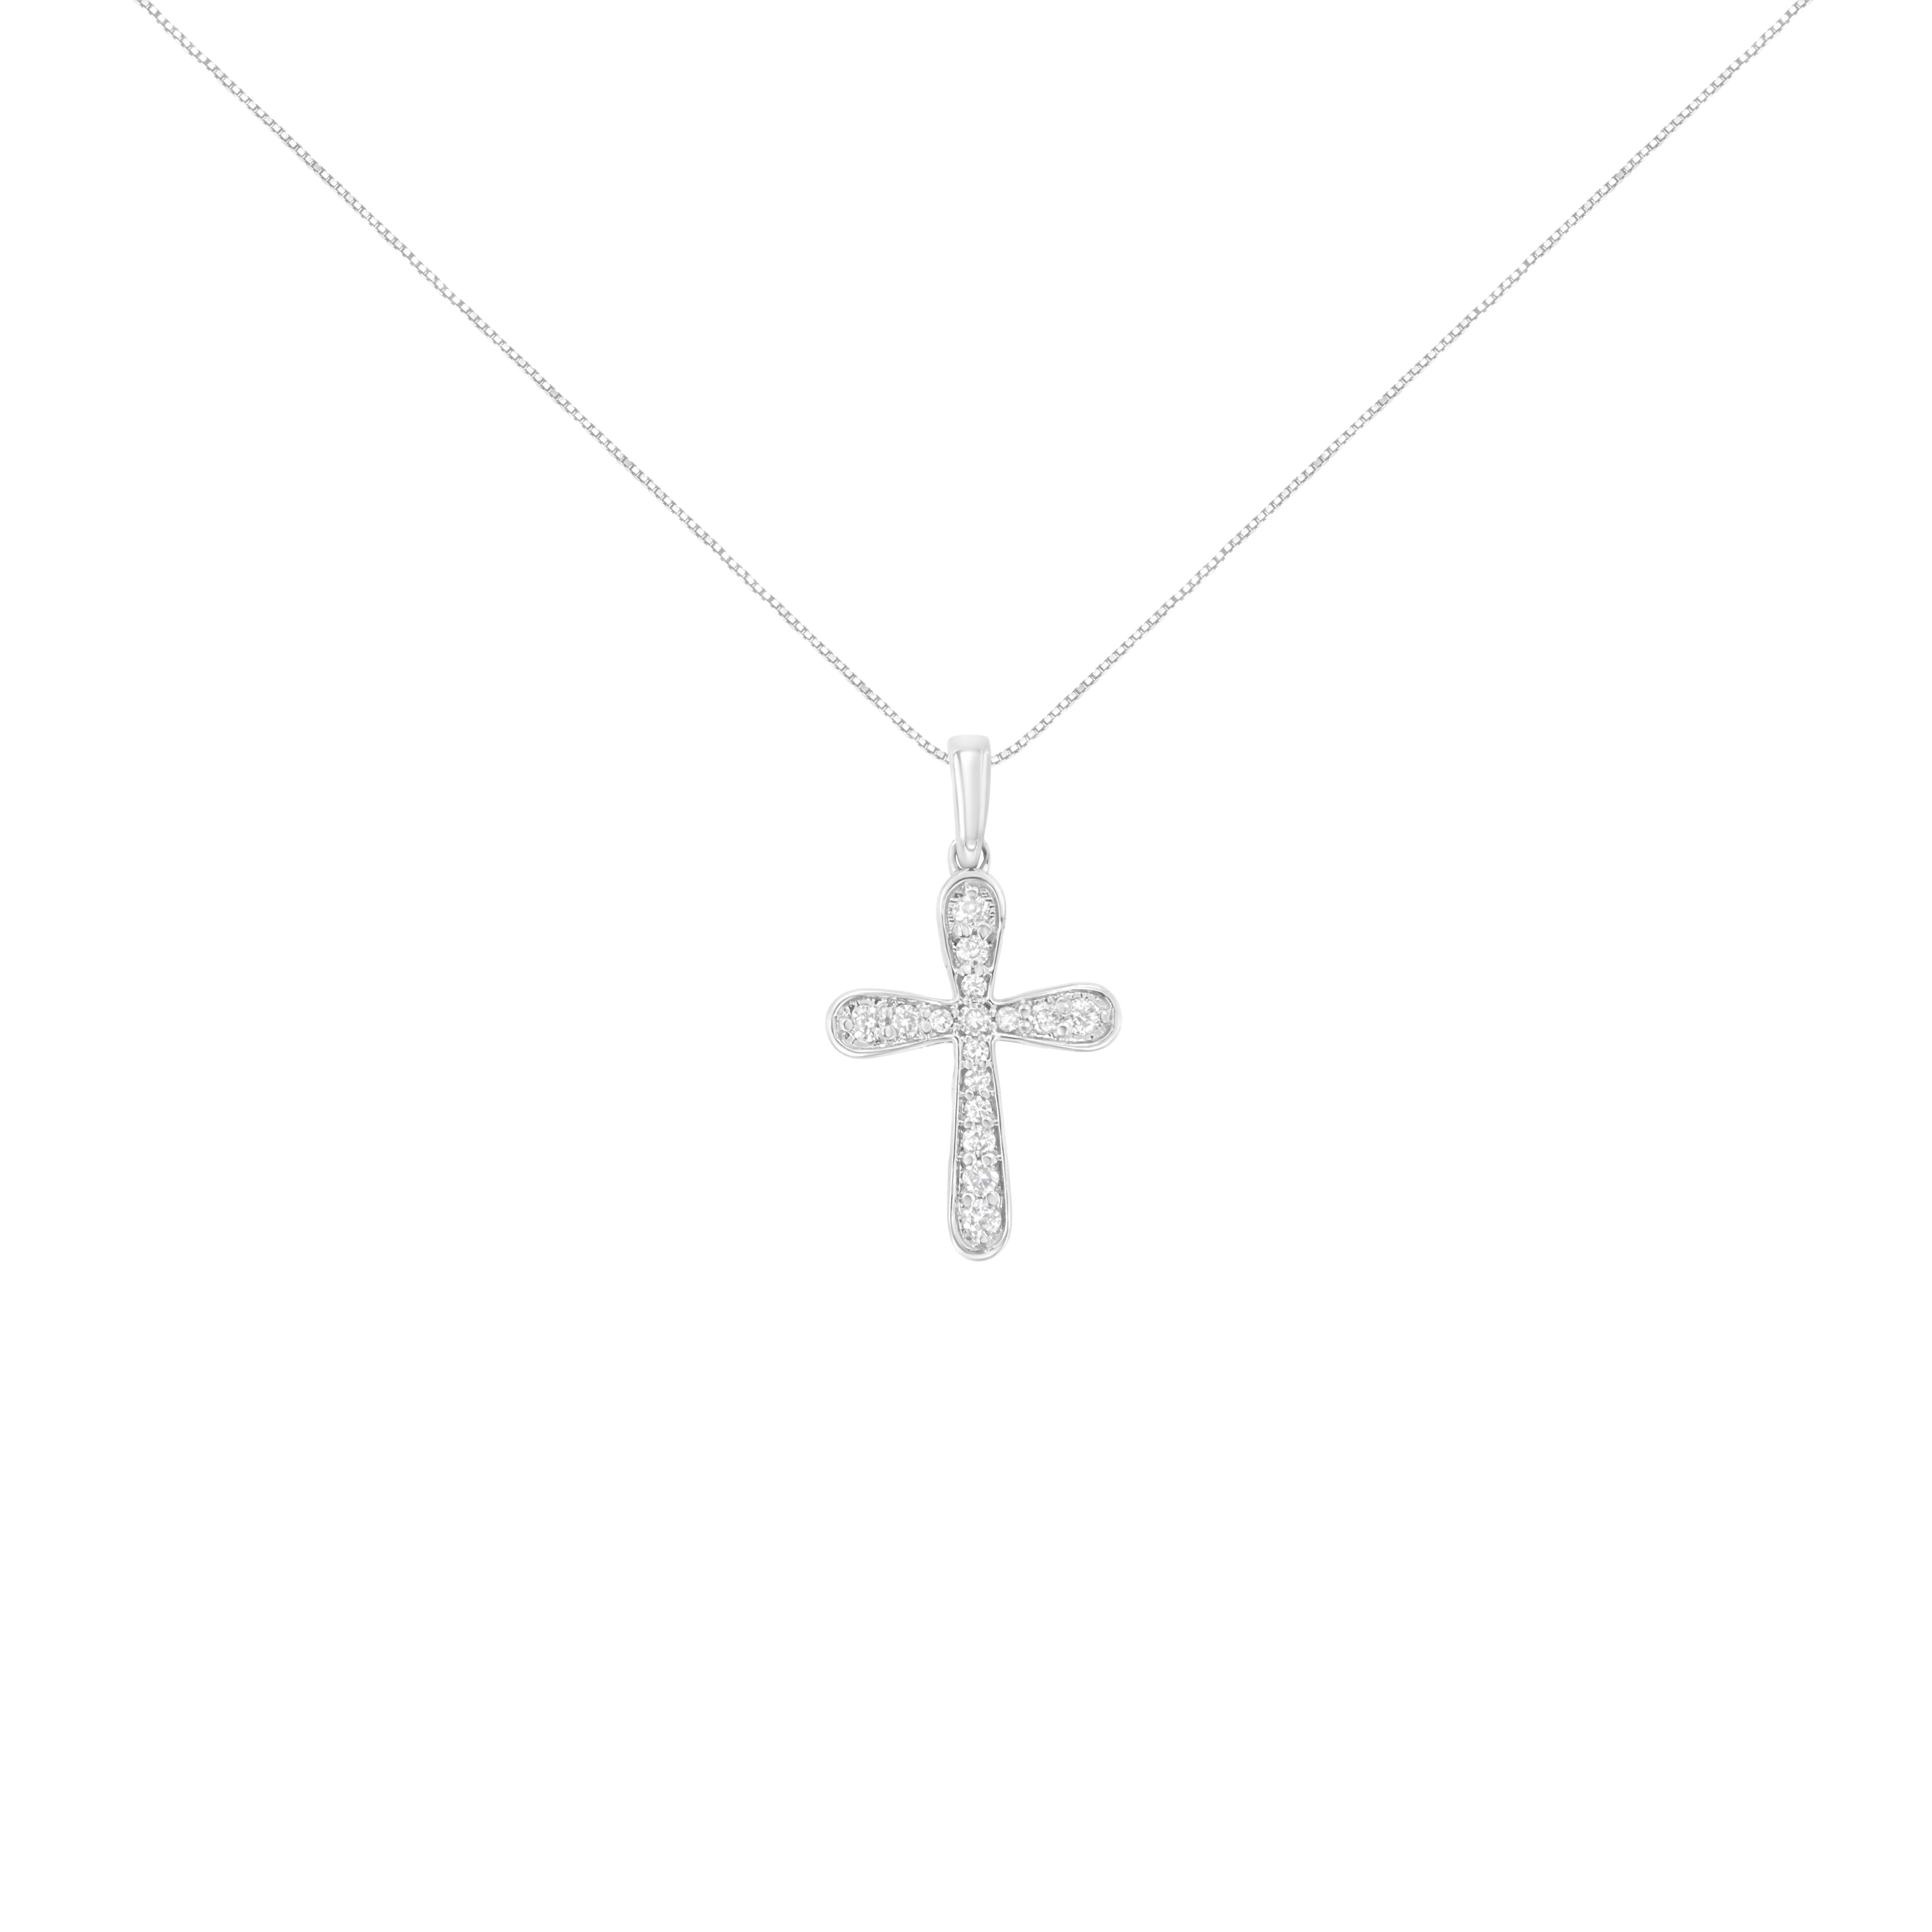 Discover divine elegance with our sterling silver cross pendant necklace, adorned with 16 natural round-cut diamonds. Embrace the timeless symbol of faith, enhanced by the brilliance of diamonds totaling 1/4 carat. Each diamond, with I-J color and